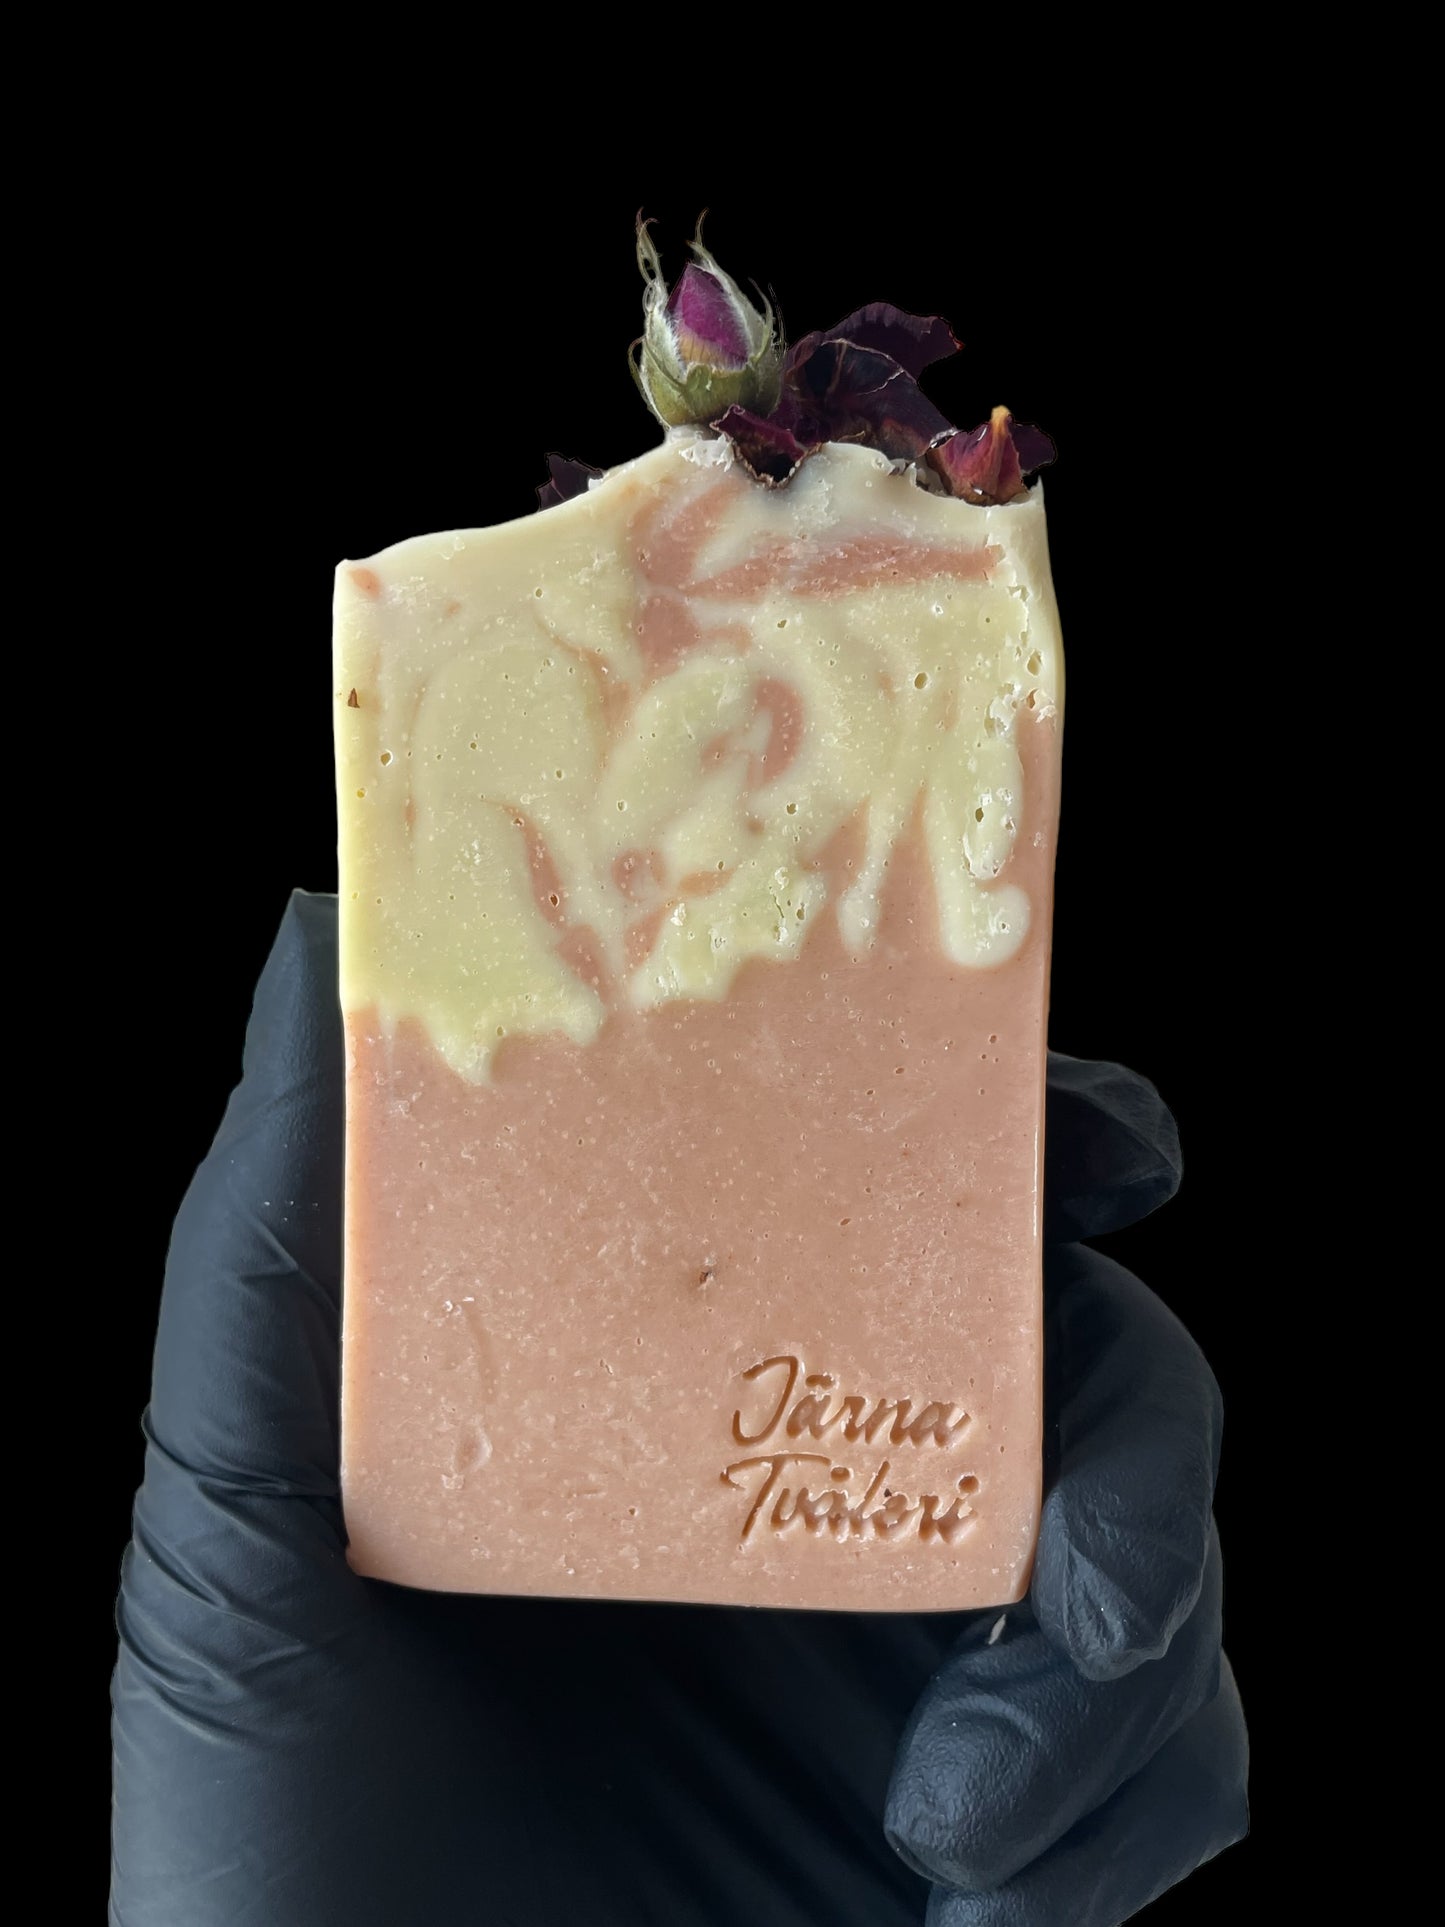 The 1-year soap